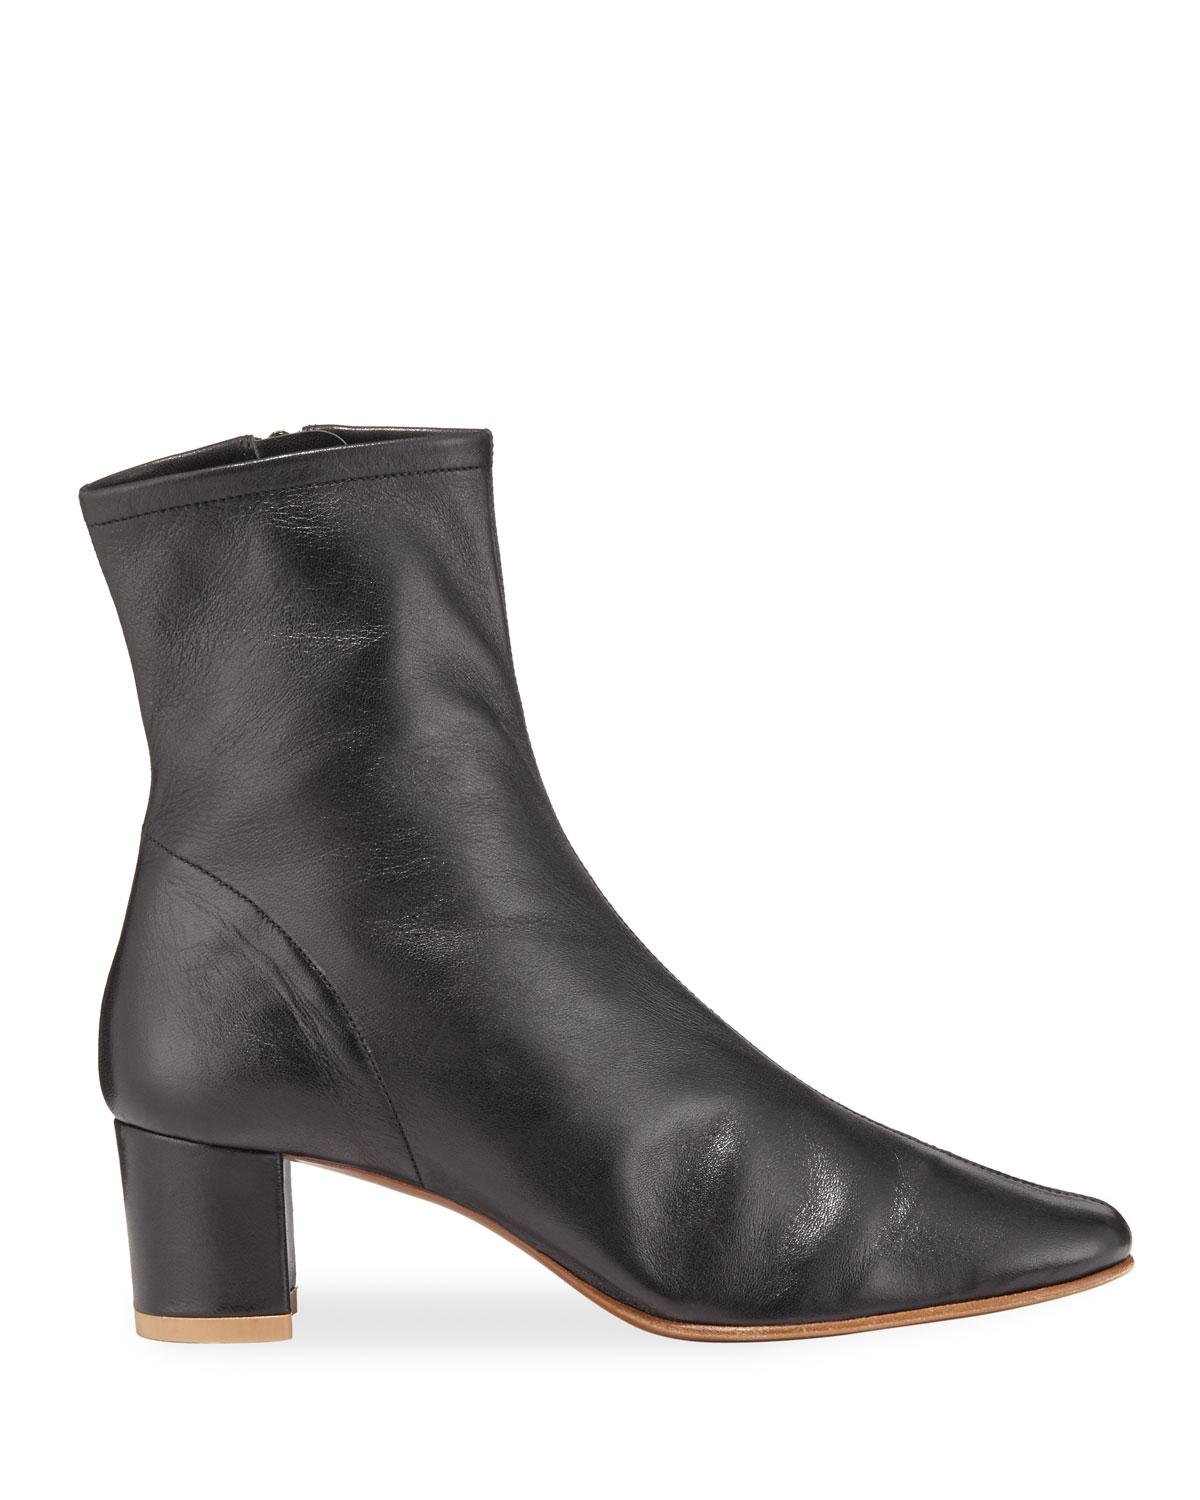 BY FAR Sofia Leather Ankle Booties in Black - Lyst